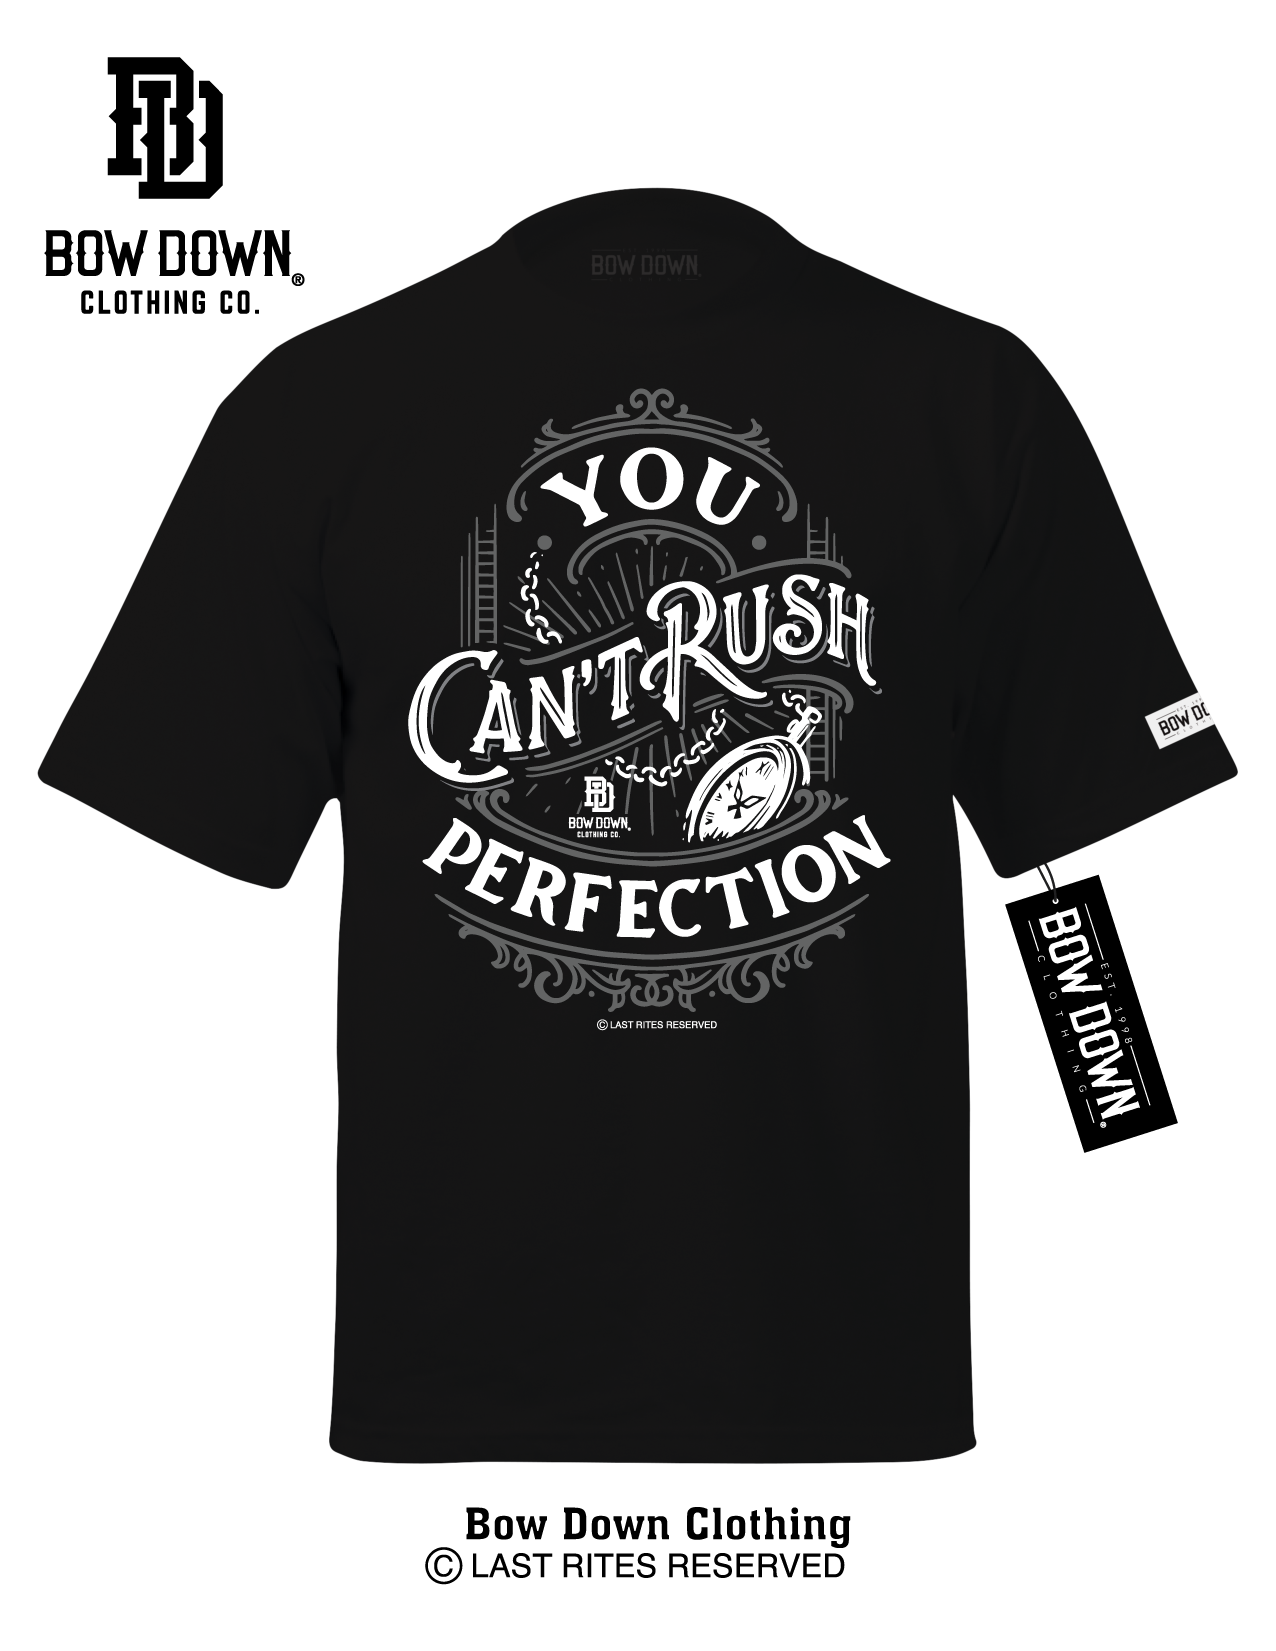 CAN'T RUSH PERFECTION